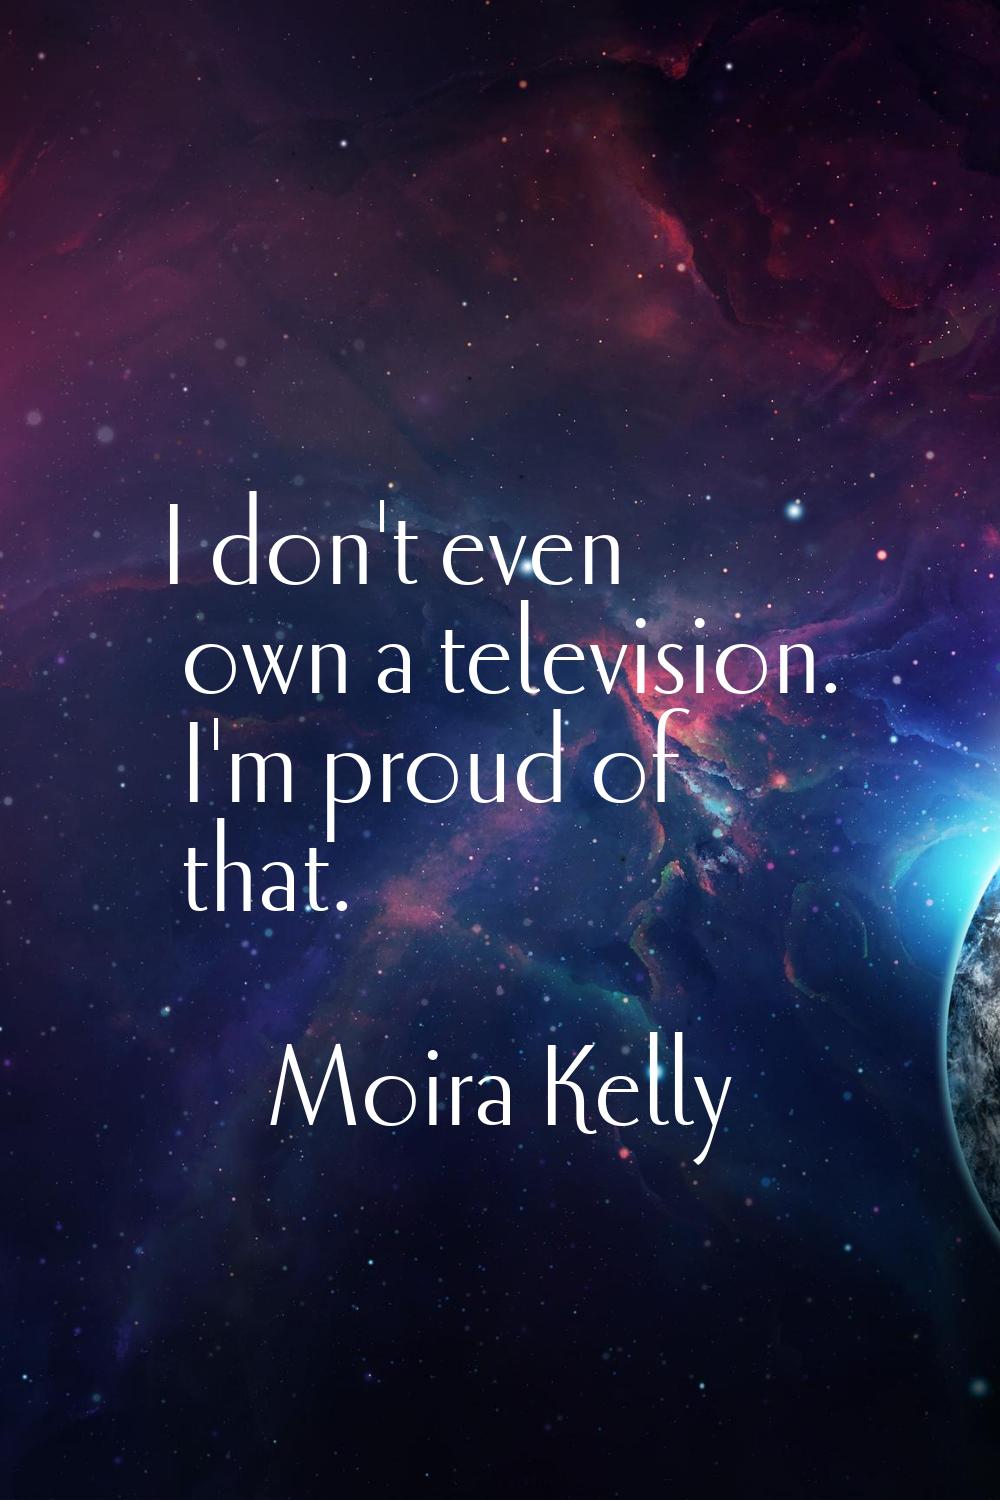 I don't even own a television. I'm proud of that.